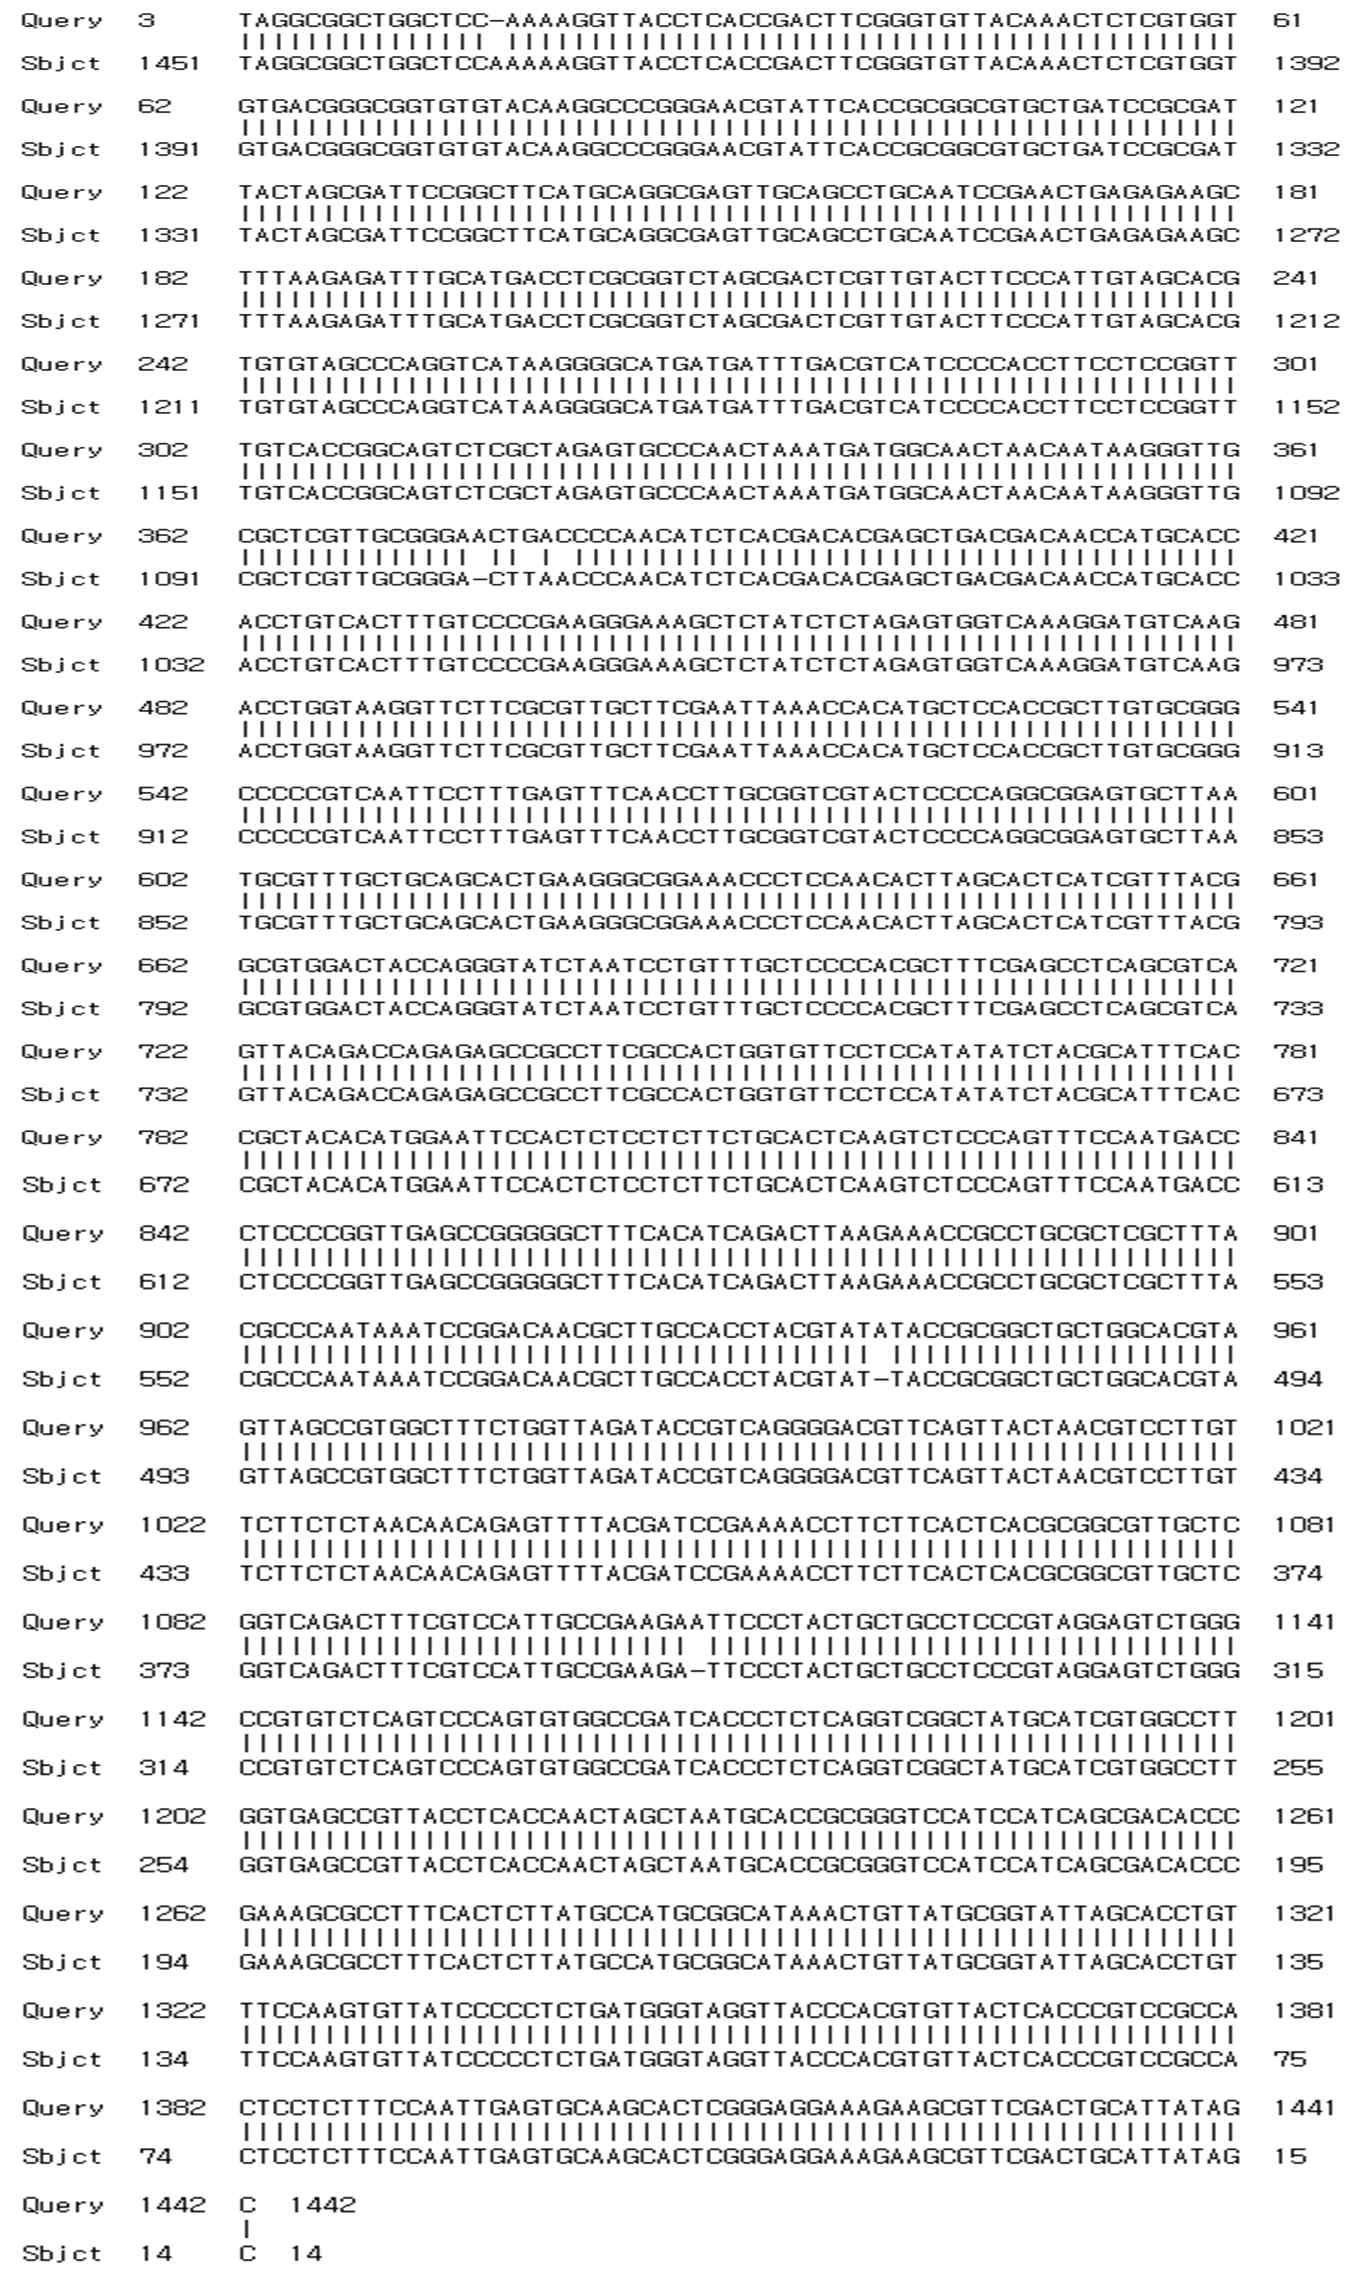 16S rRNA sequencing of A-86 strain